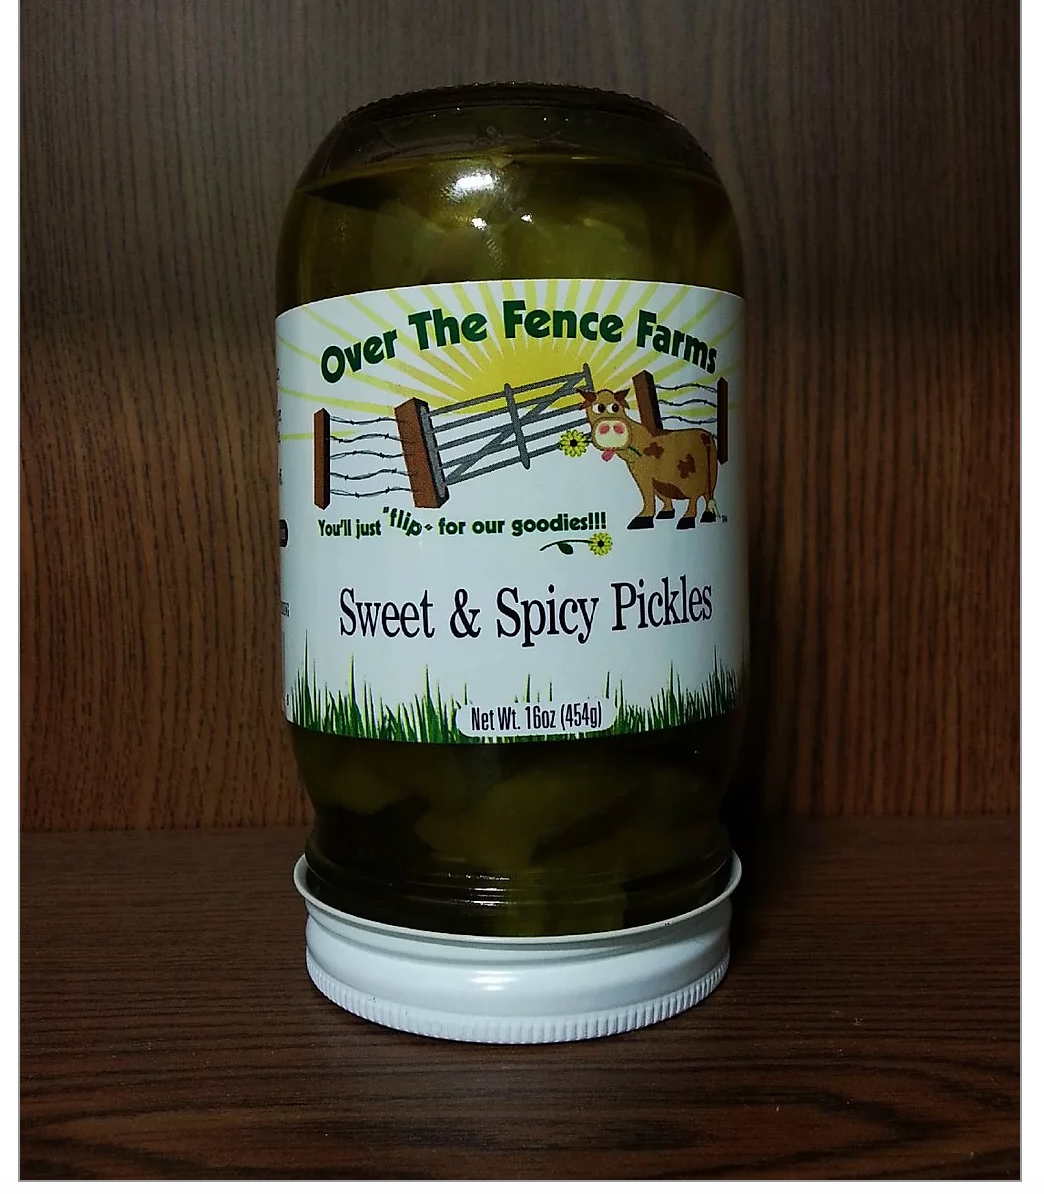 Sweet & Spicy Pickles